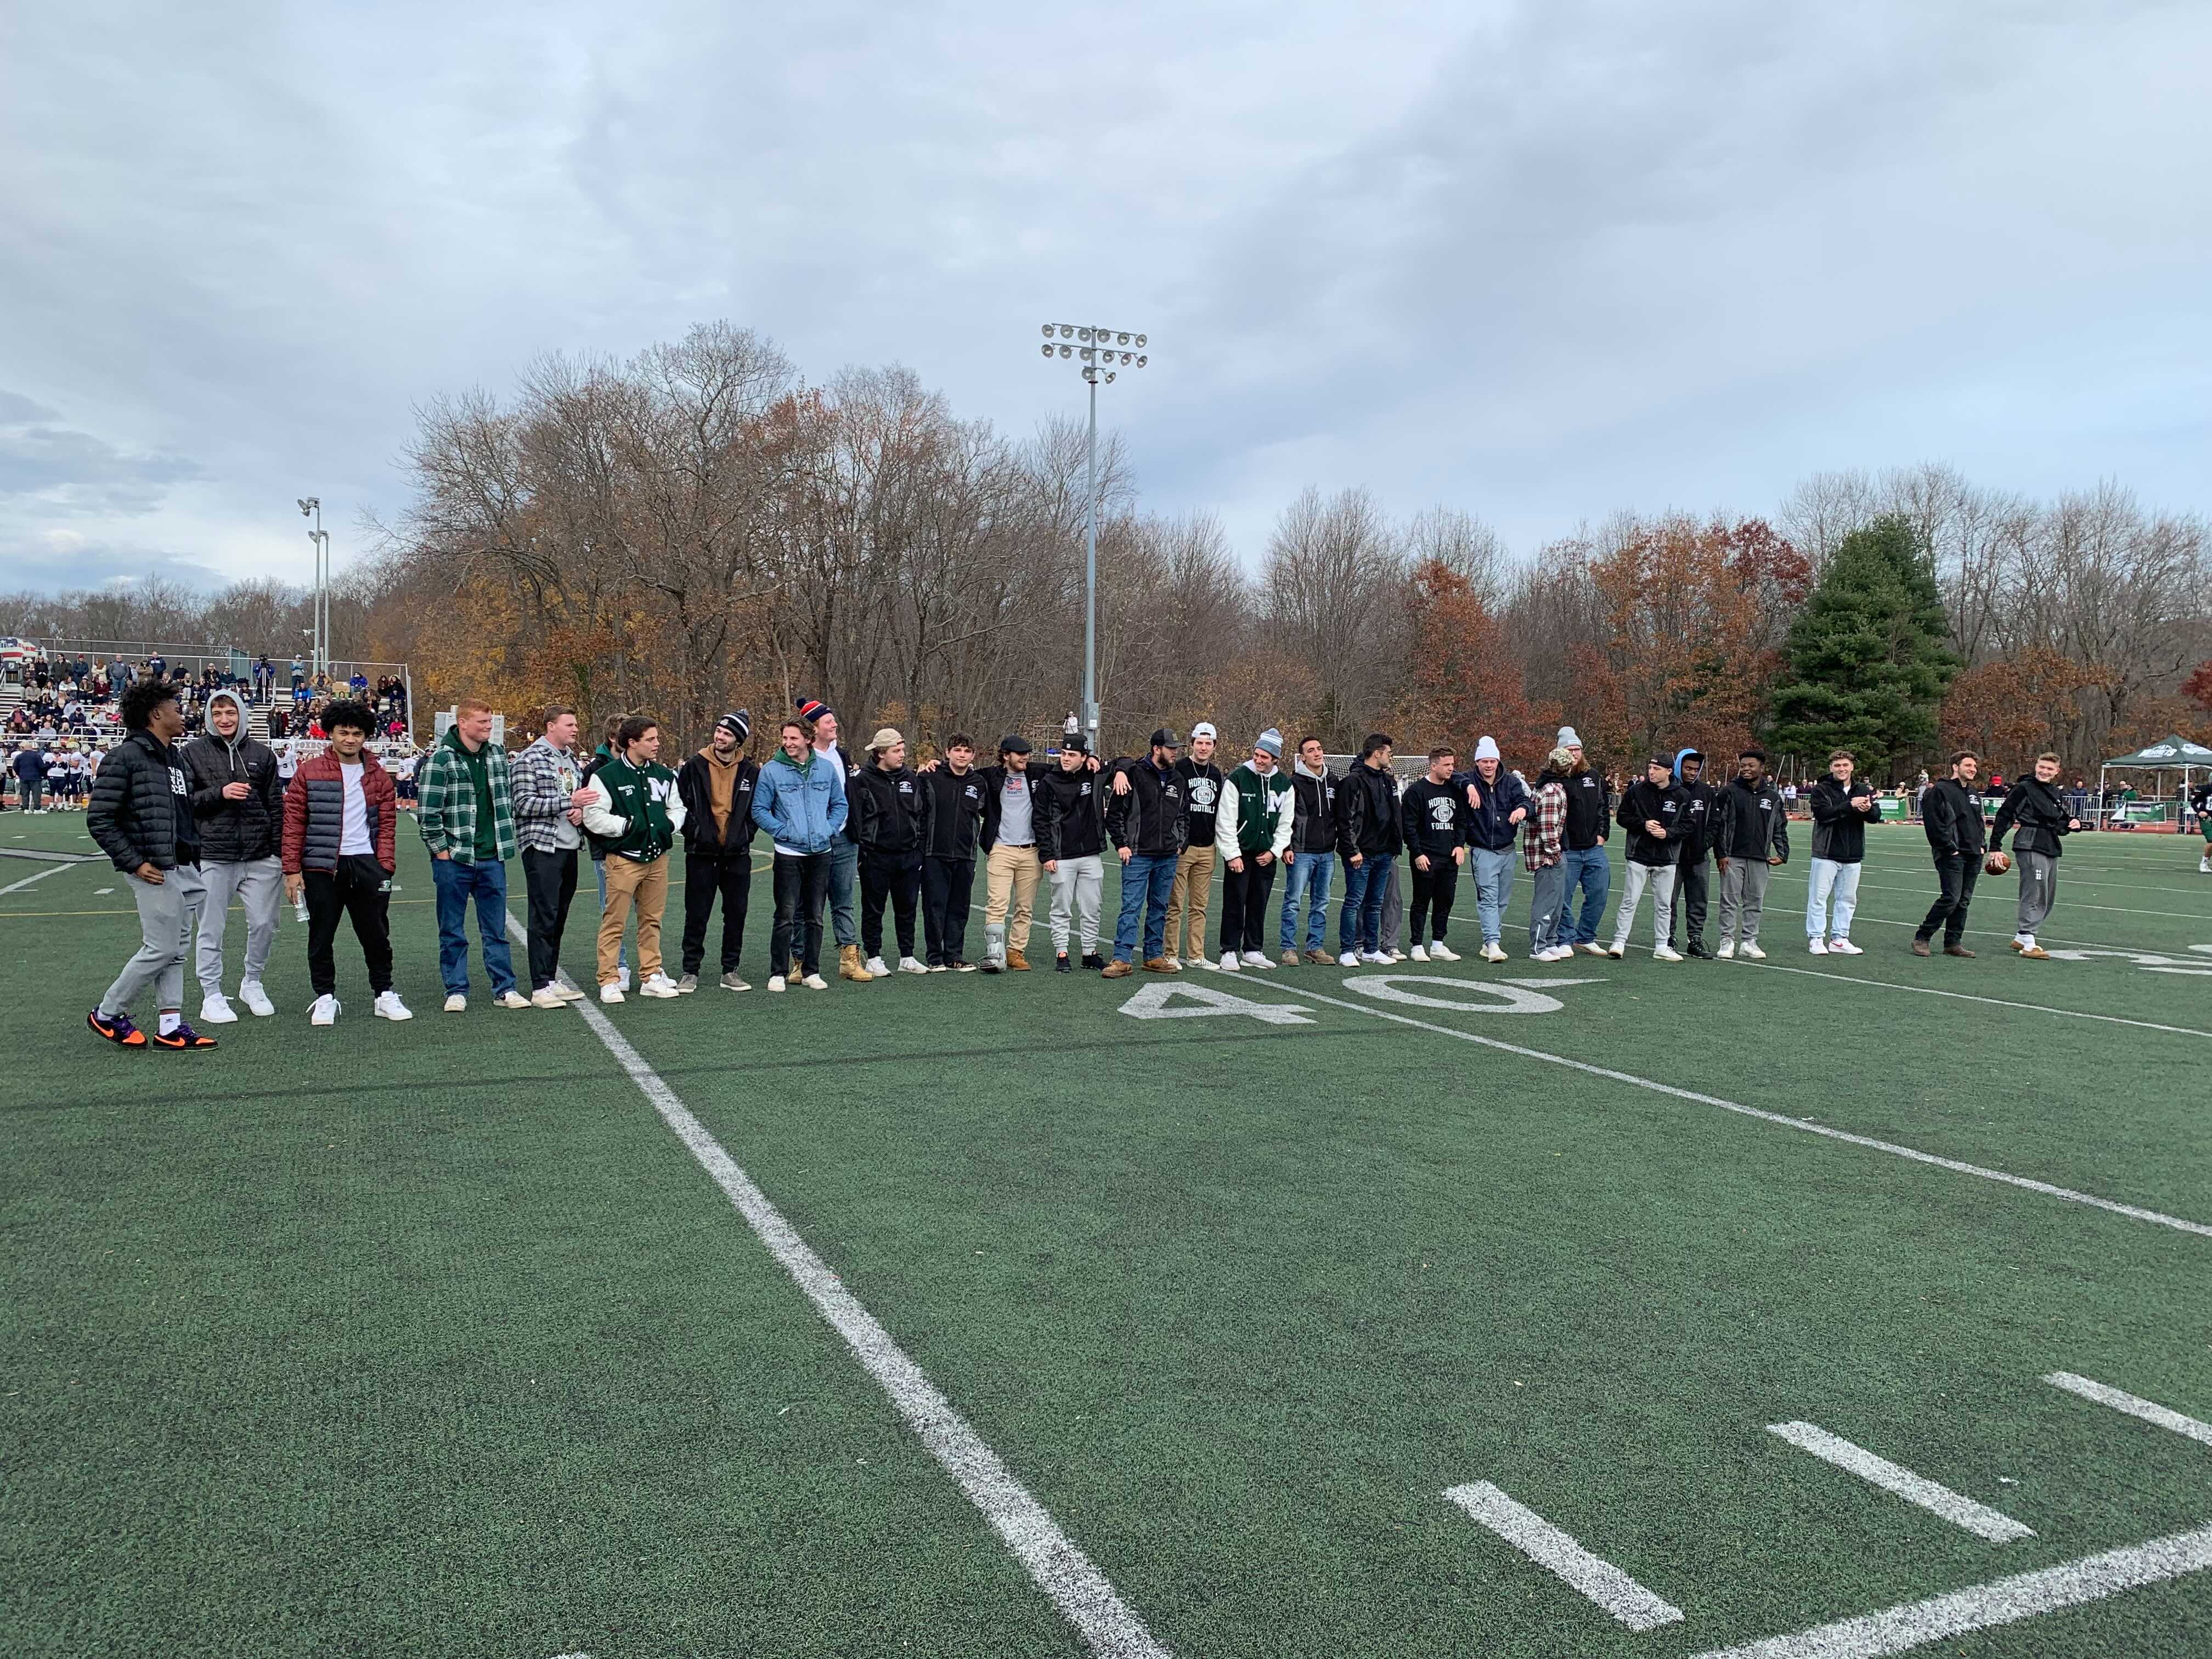 Mansfield honored its 2019 Division 2 Super Bowl winning team at halftime.